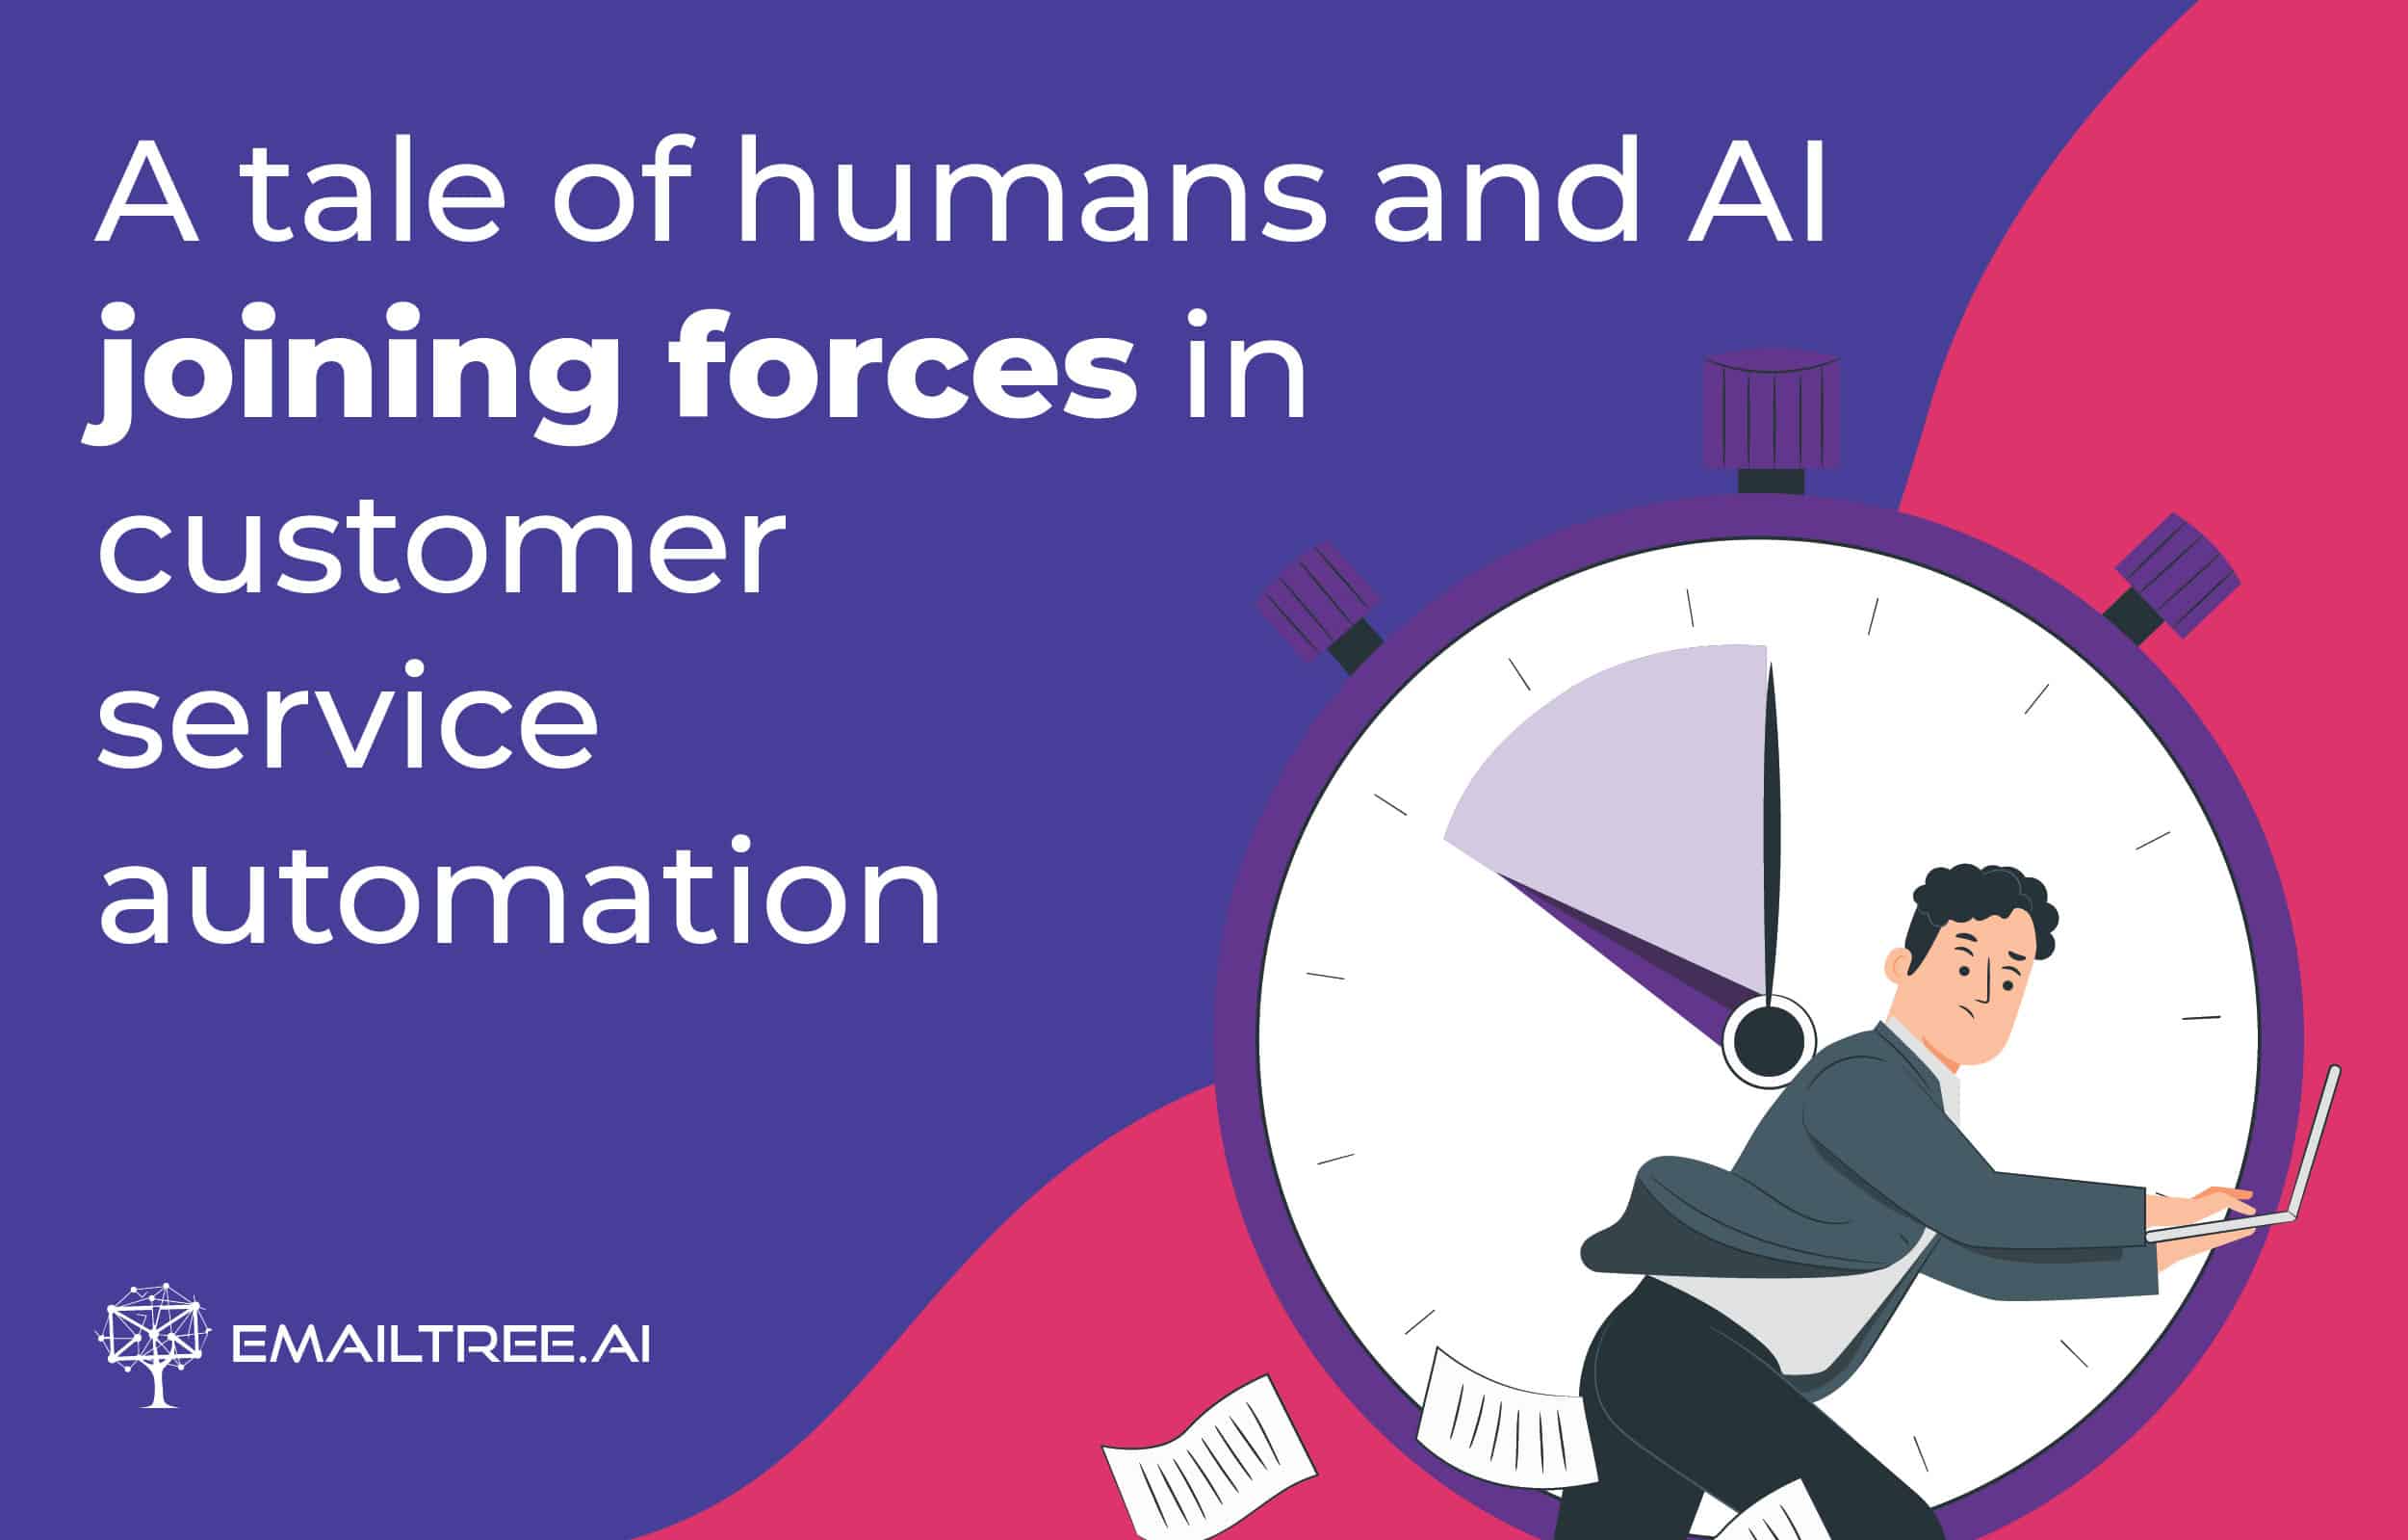 A tale of humans and AI joining forces in customer service automation